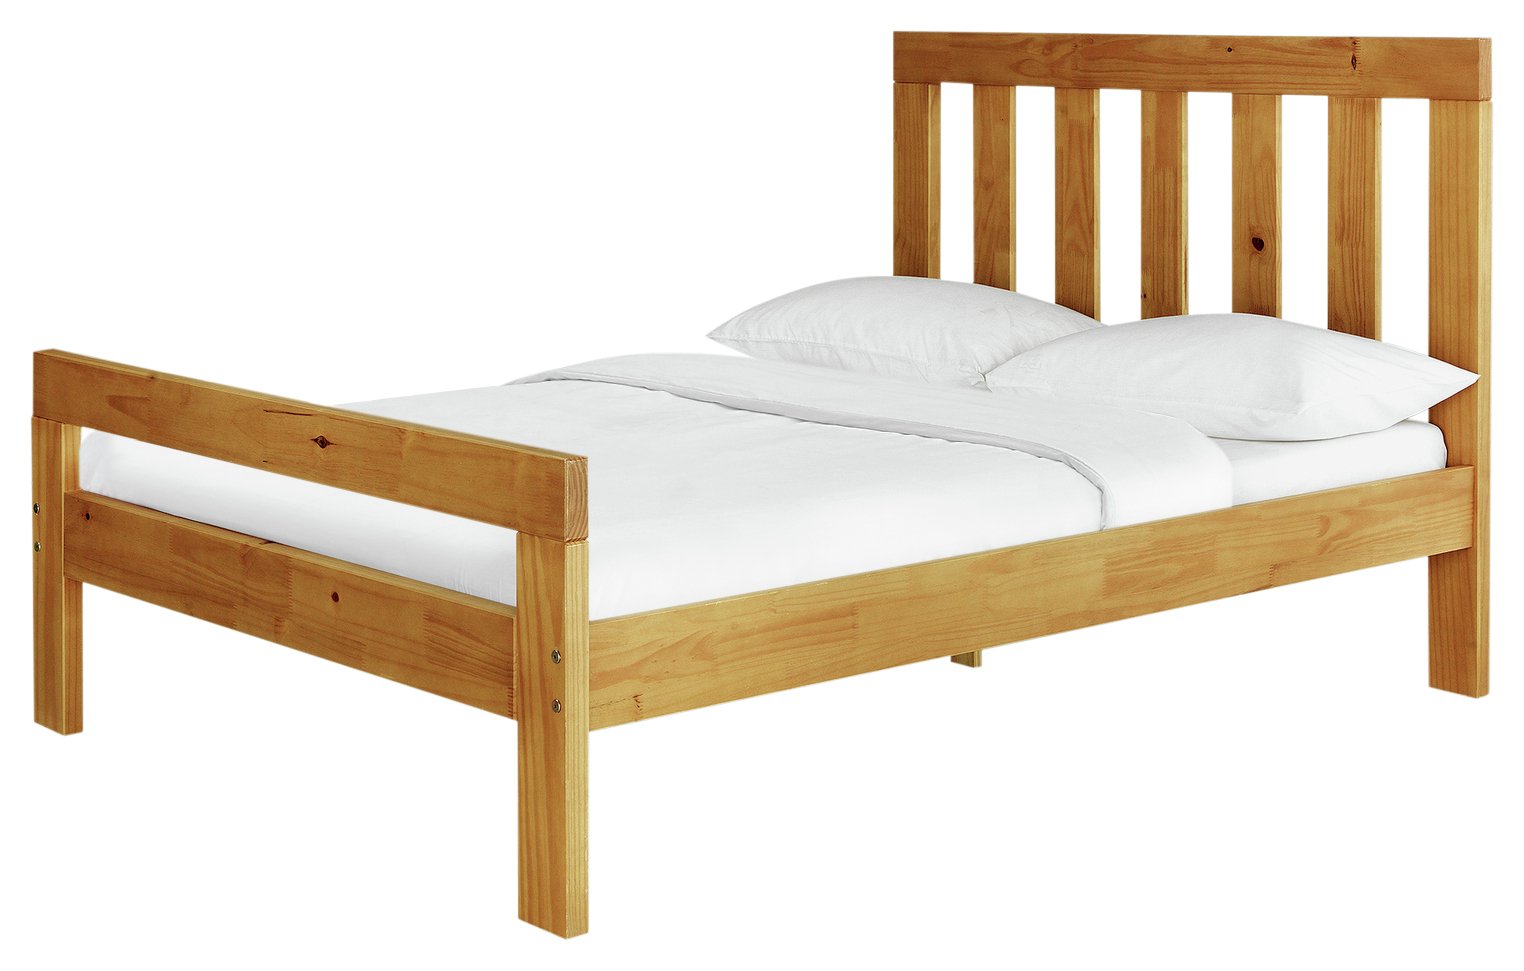 Argos Home Chile Double Bed Frame - Oak Stain